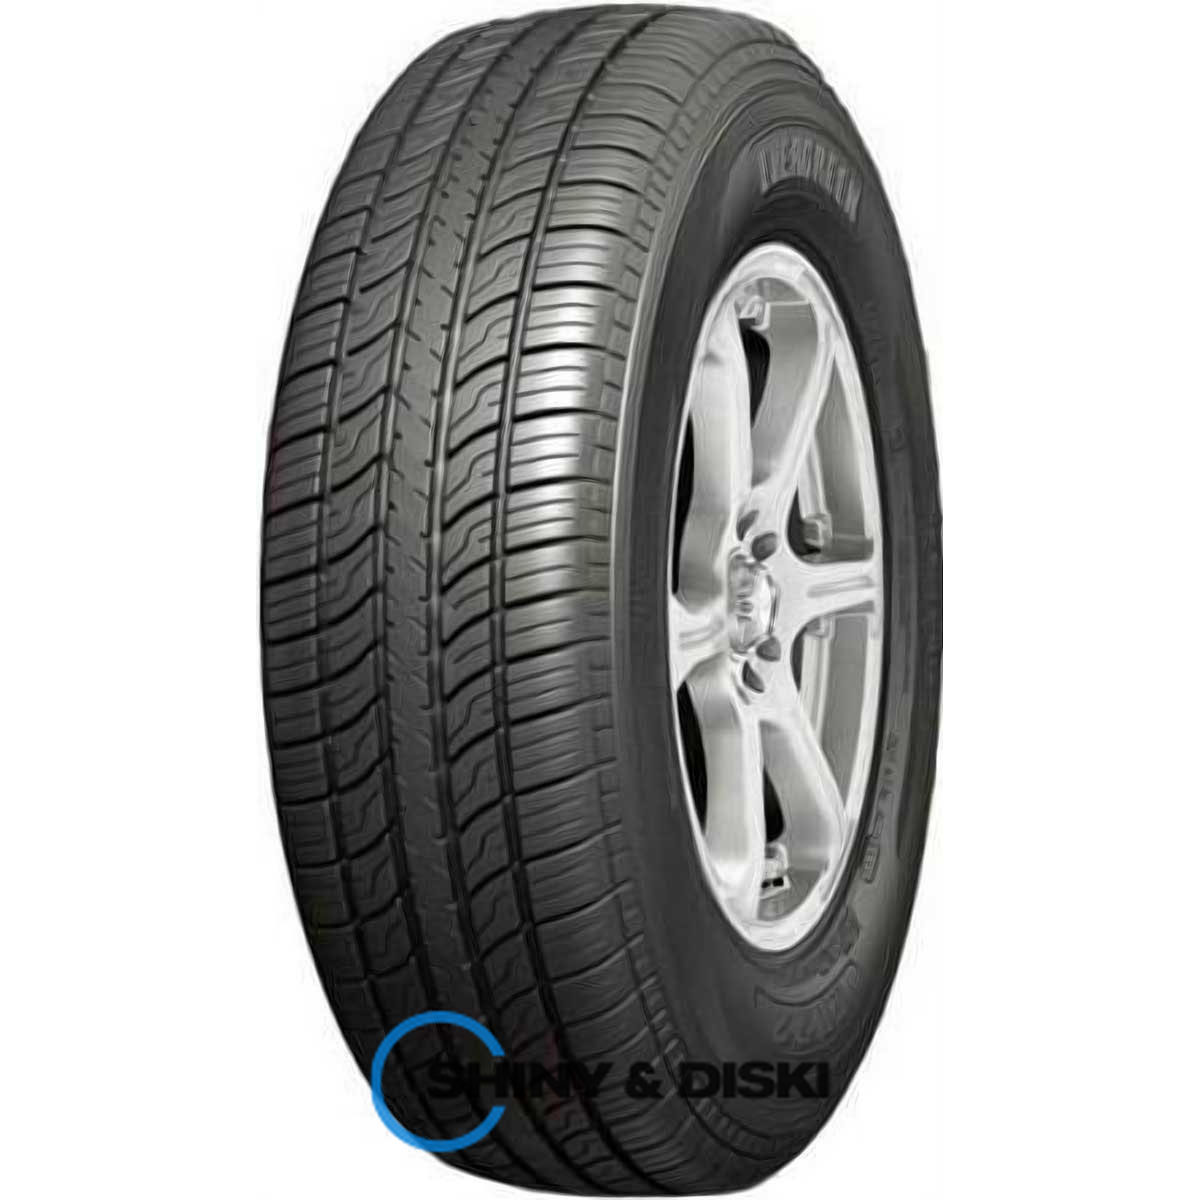 evergreen eh22 195/70 r14 91t